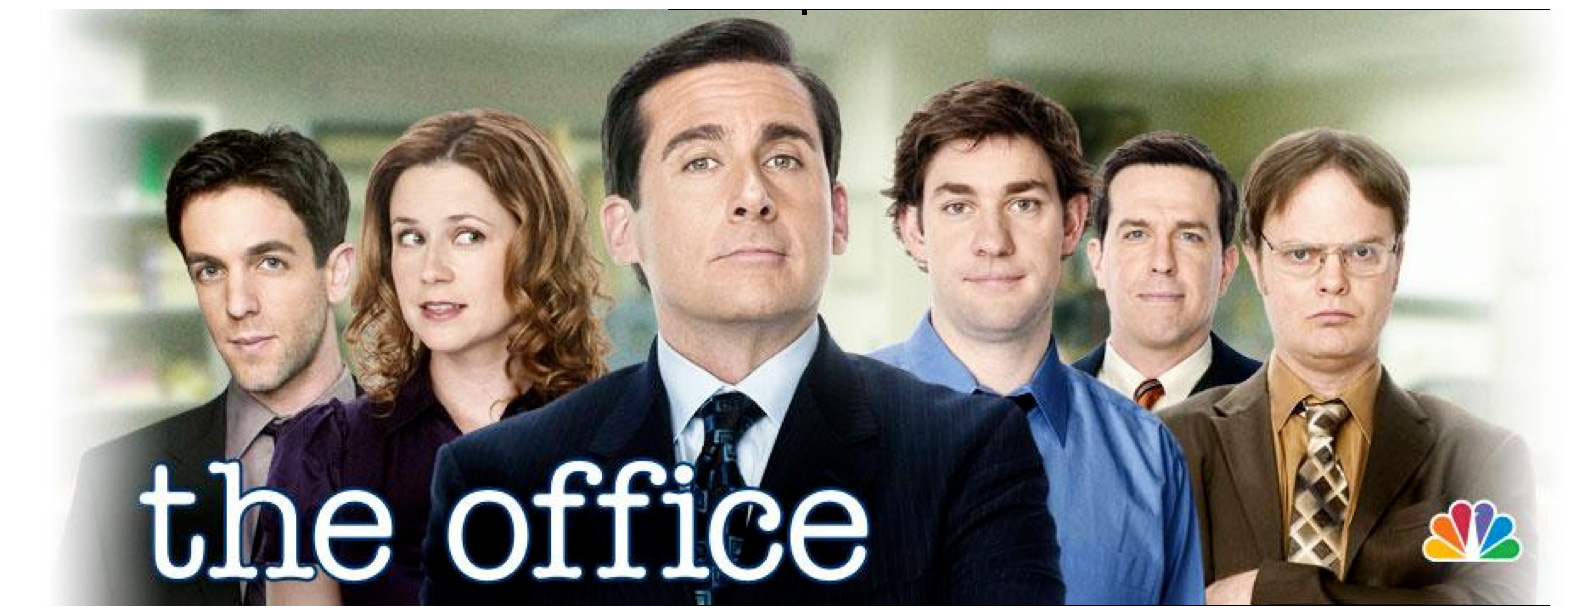 The Office (US) Backgrounds, Compatible - PC, Mobile, Gadgets| 1590x612 px